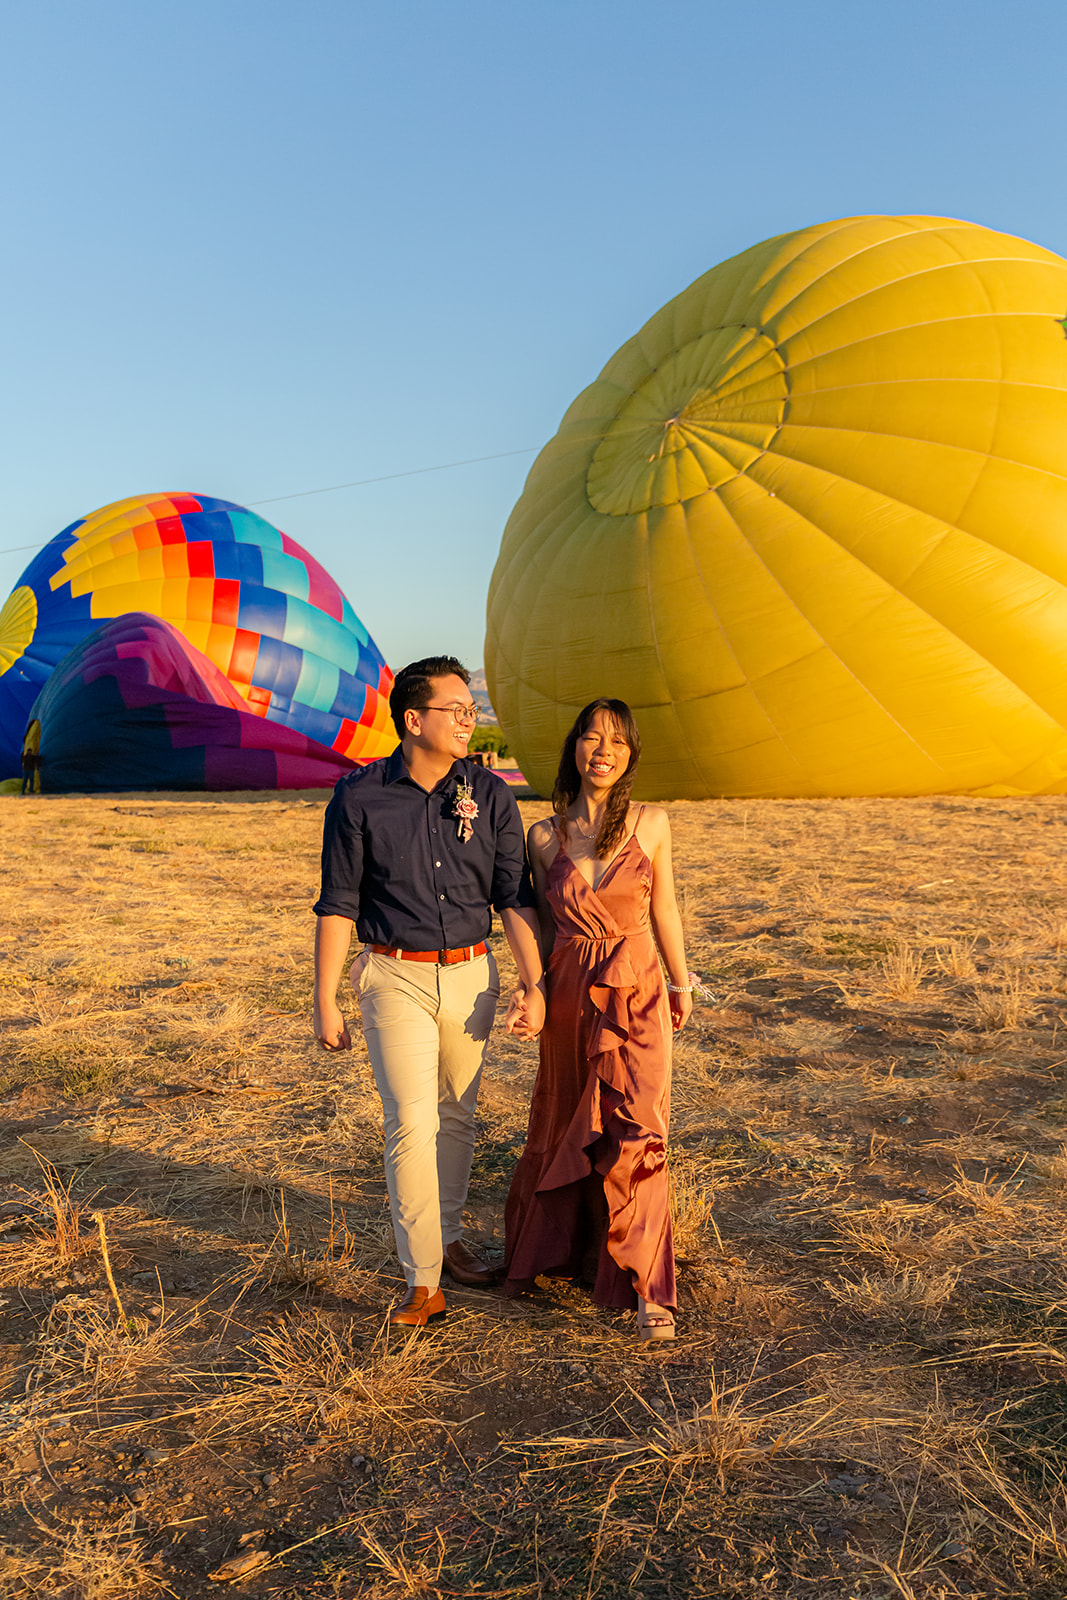 nonbinary person and their girlfriend walking in front of colorful hot air balloons